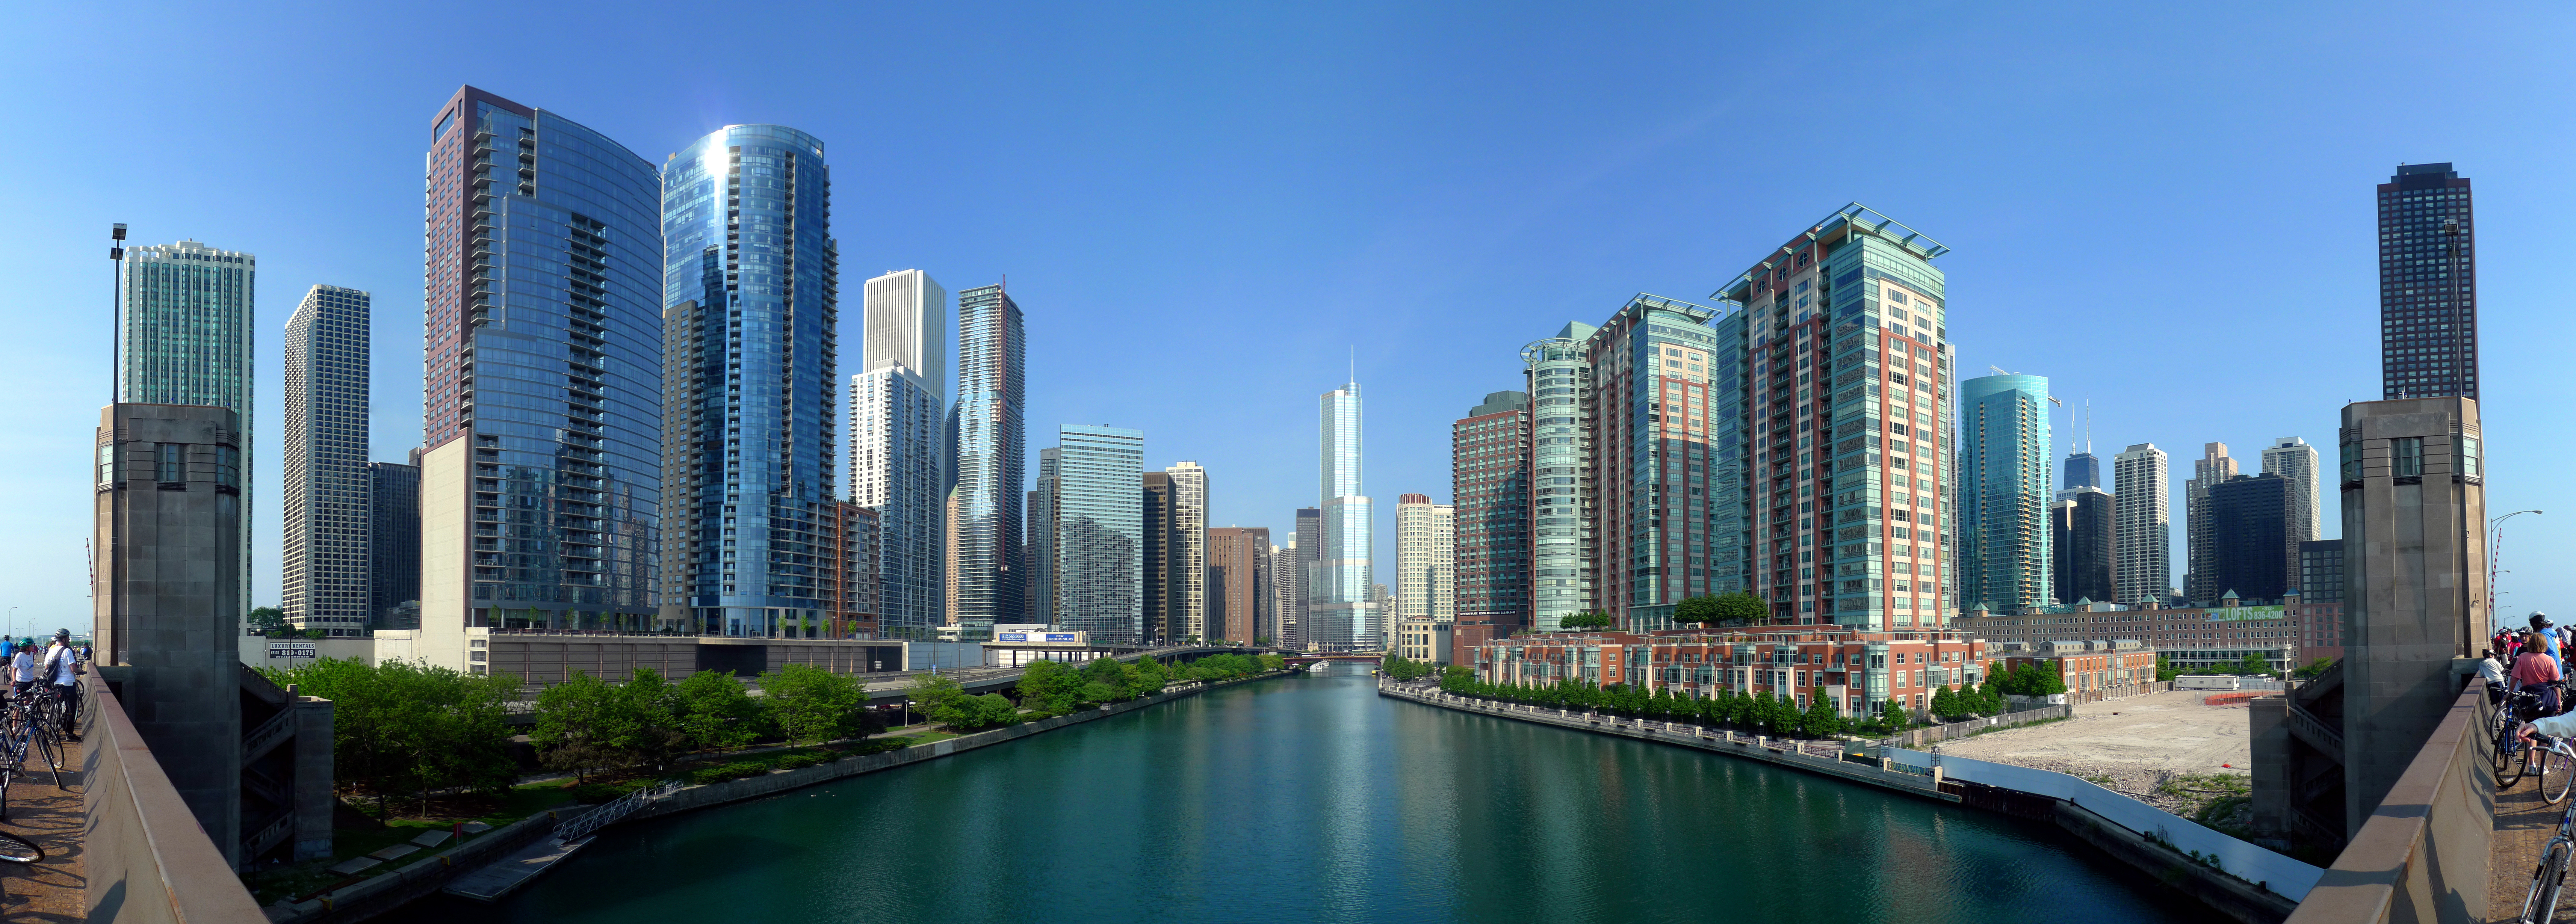 4K Chicago Wallpapers